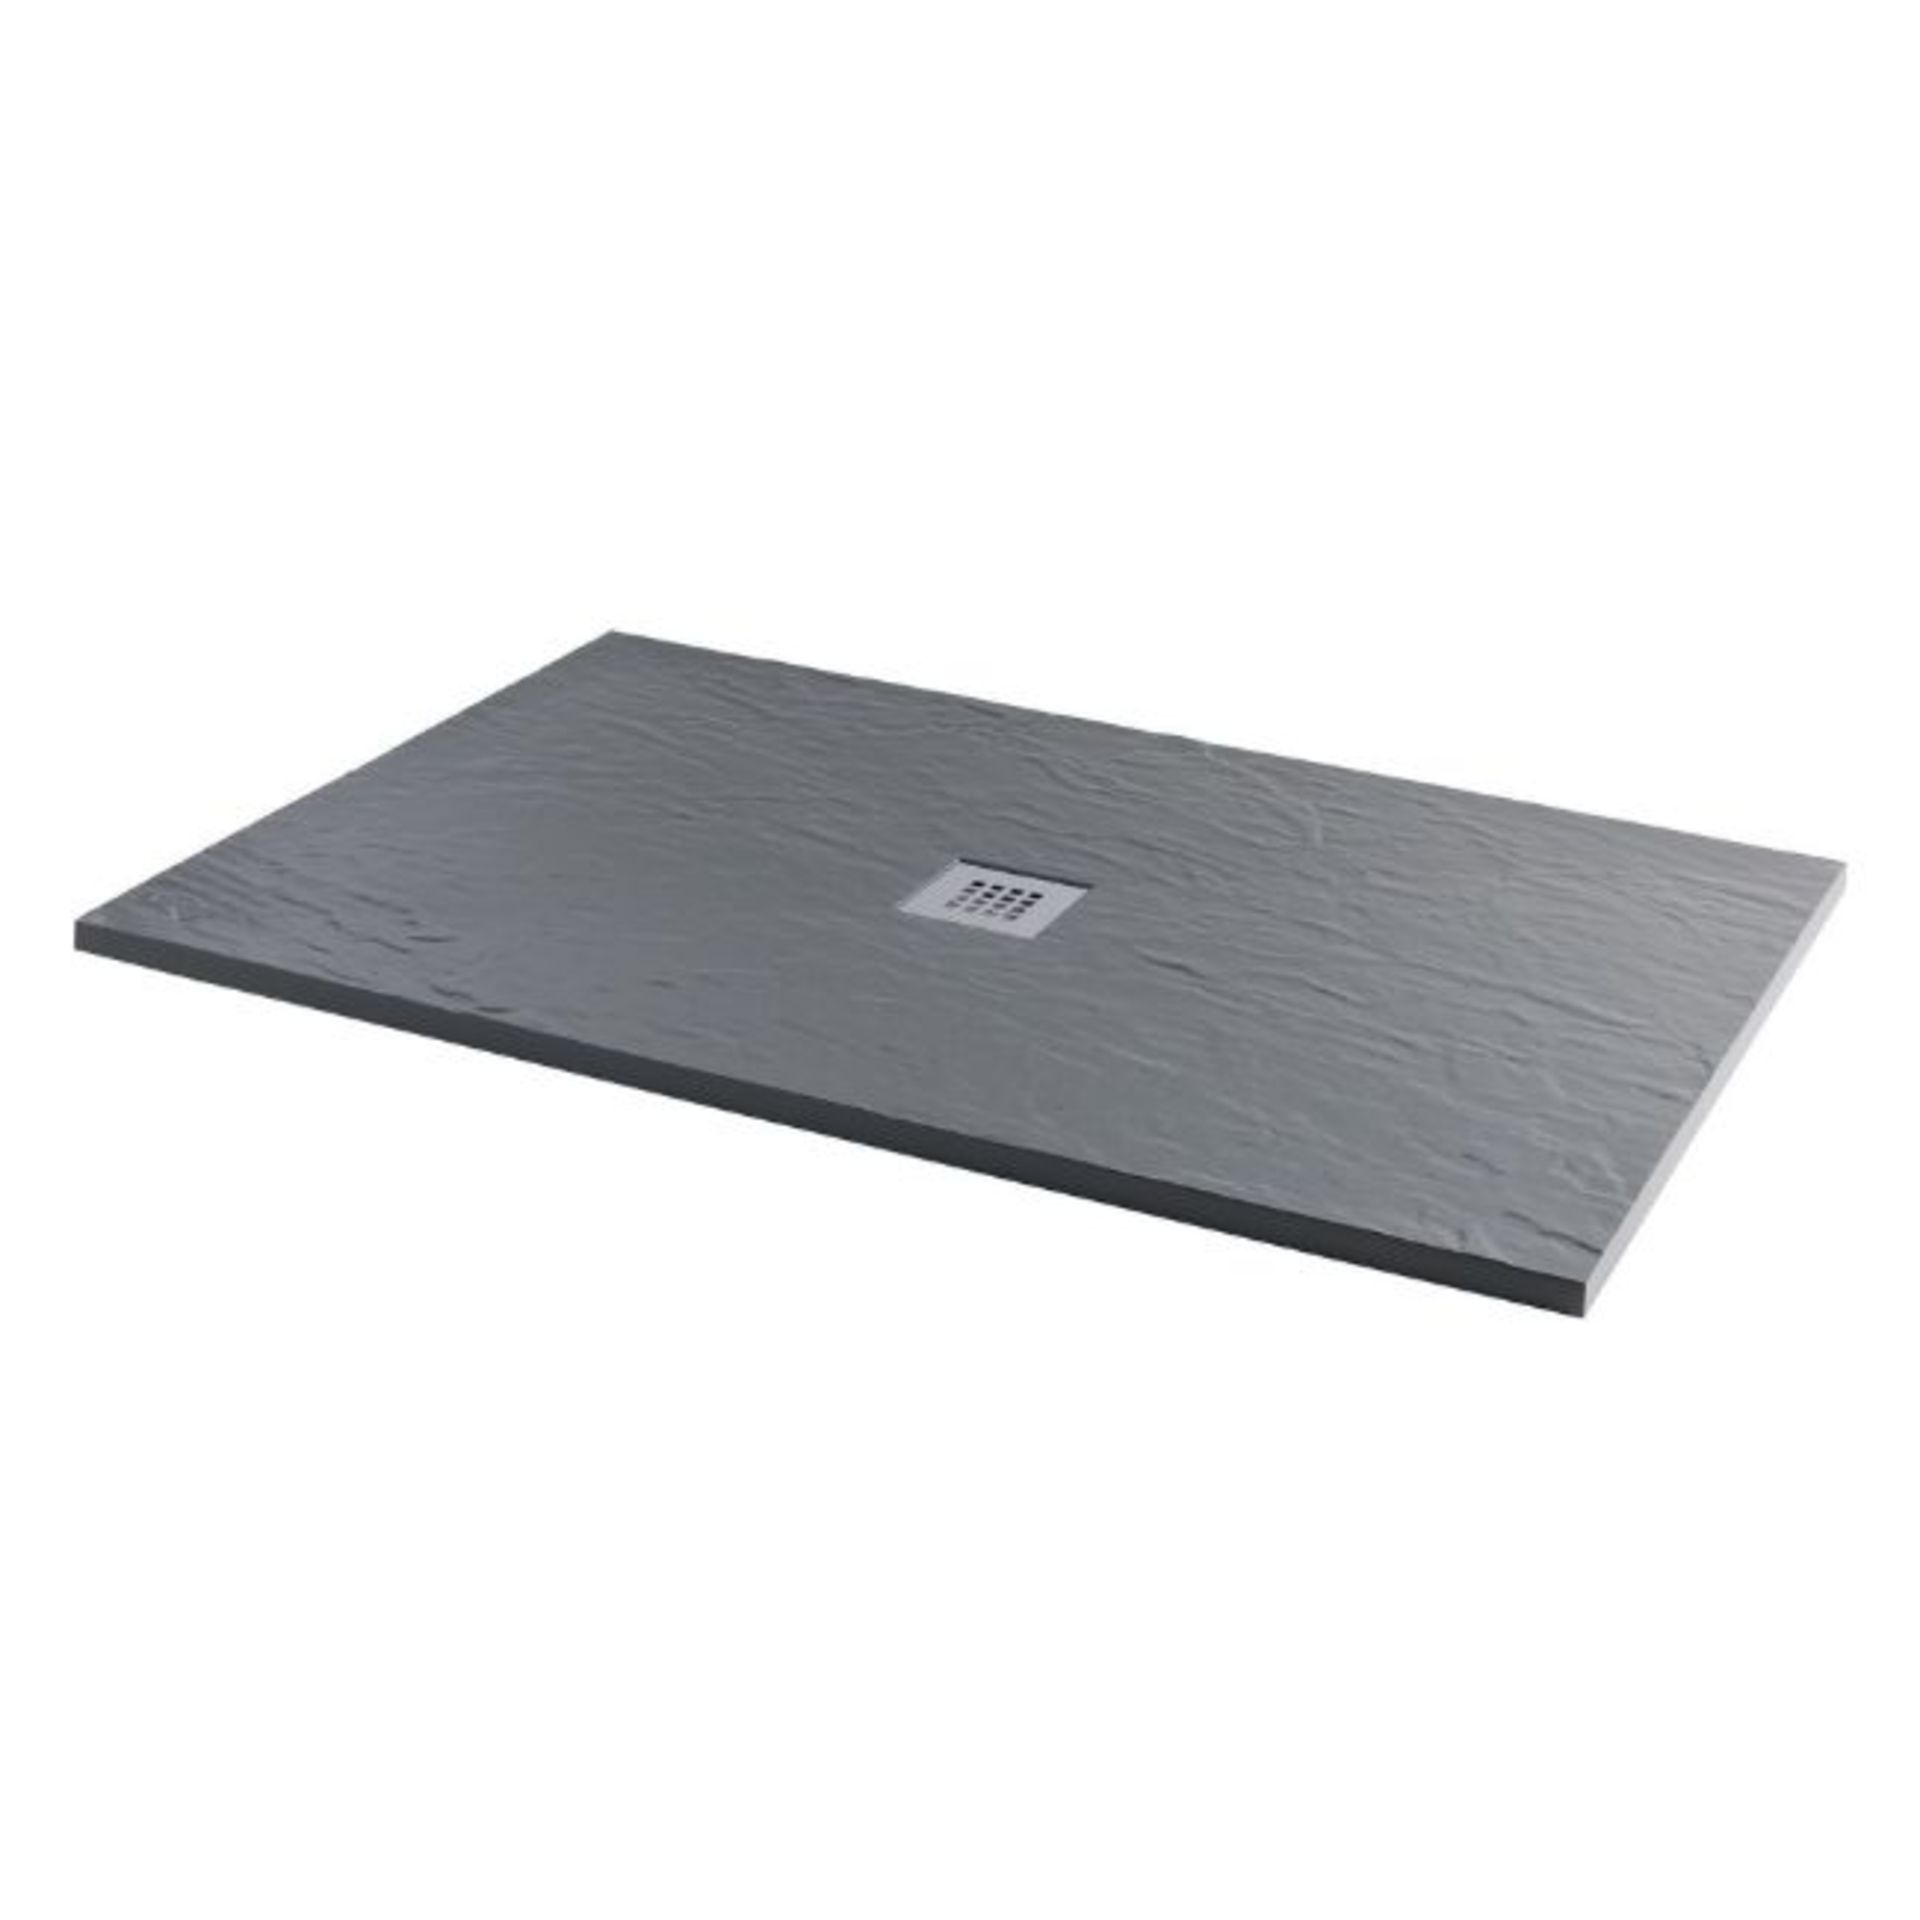 New (S64) 1200x900 mm Rectangular Slate Effect Shower Tray In Grey. Manufactured In The Uk From... - Image 2 of 2